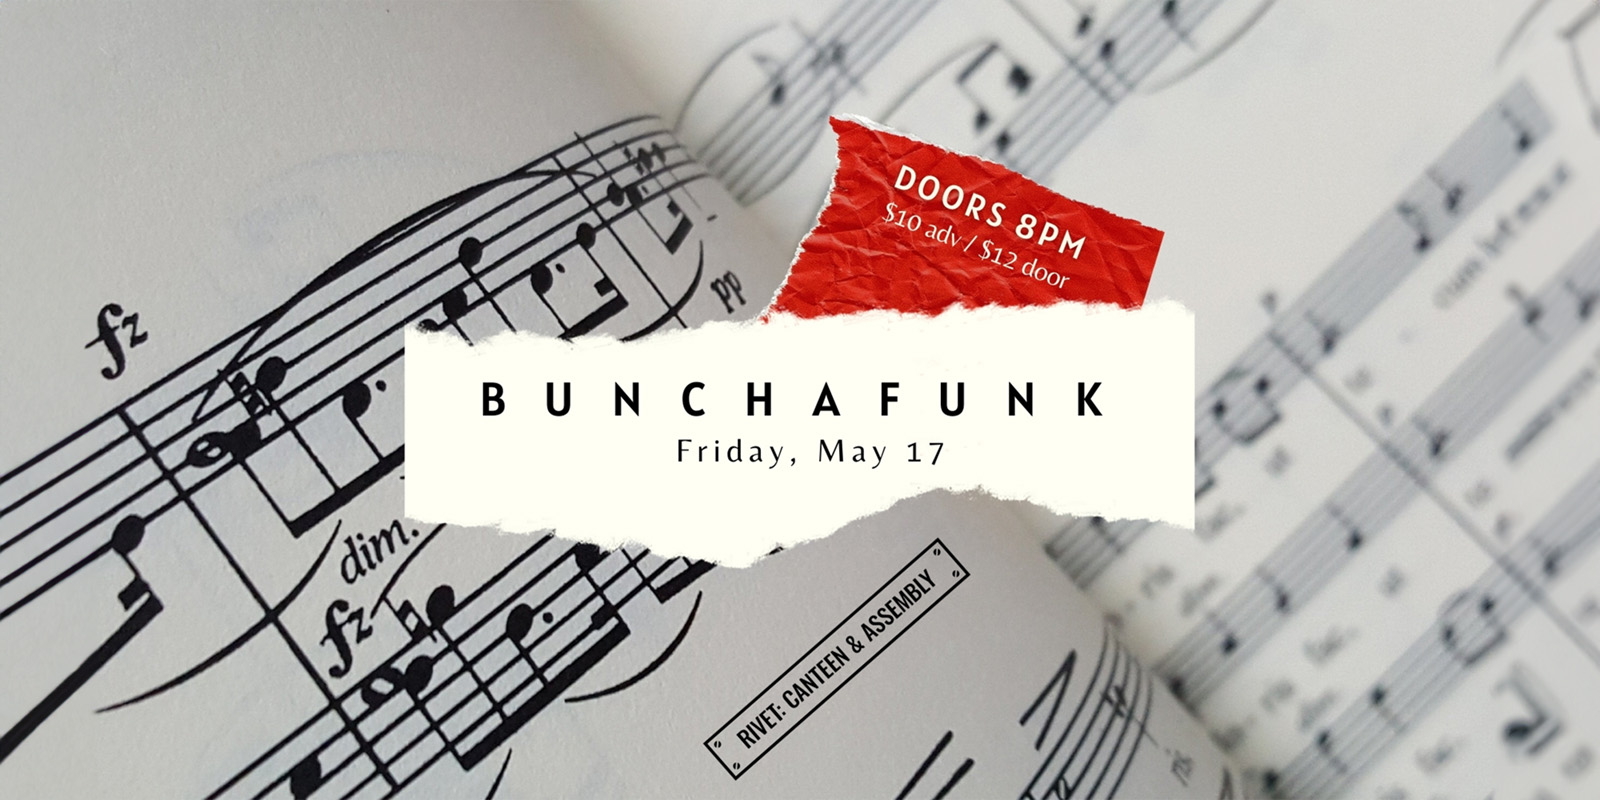 Bunchafunk live concert at Rivet: Canteen & Assembly on Friday, May 17th. Doors: 8:00 PM. Join us!